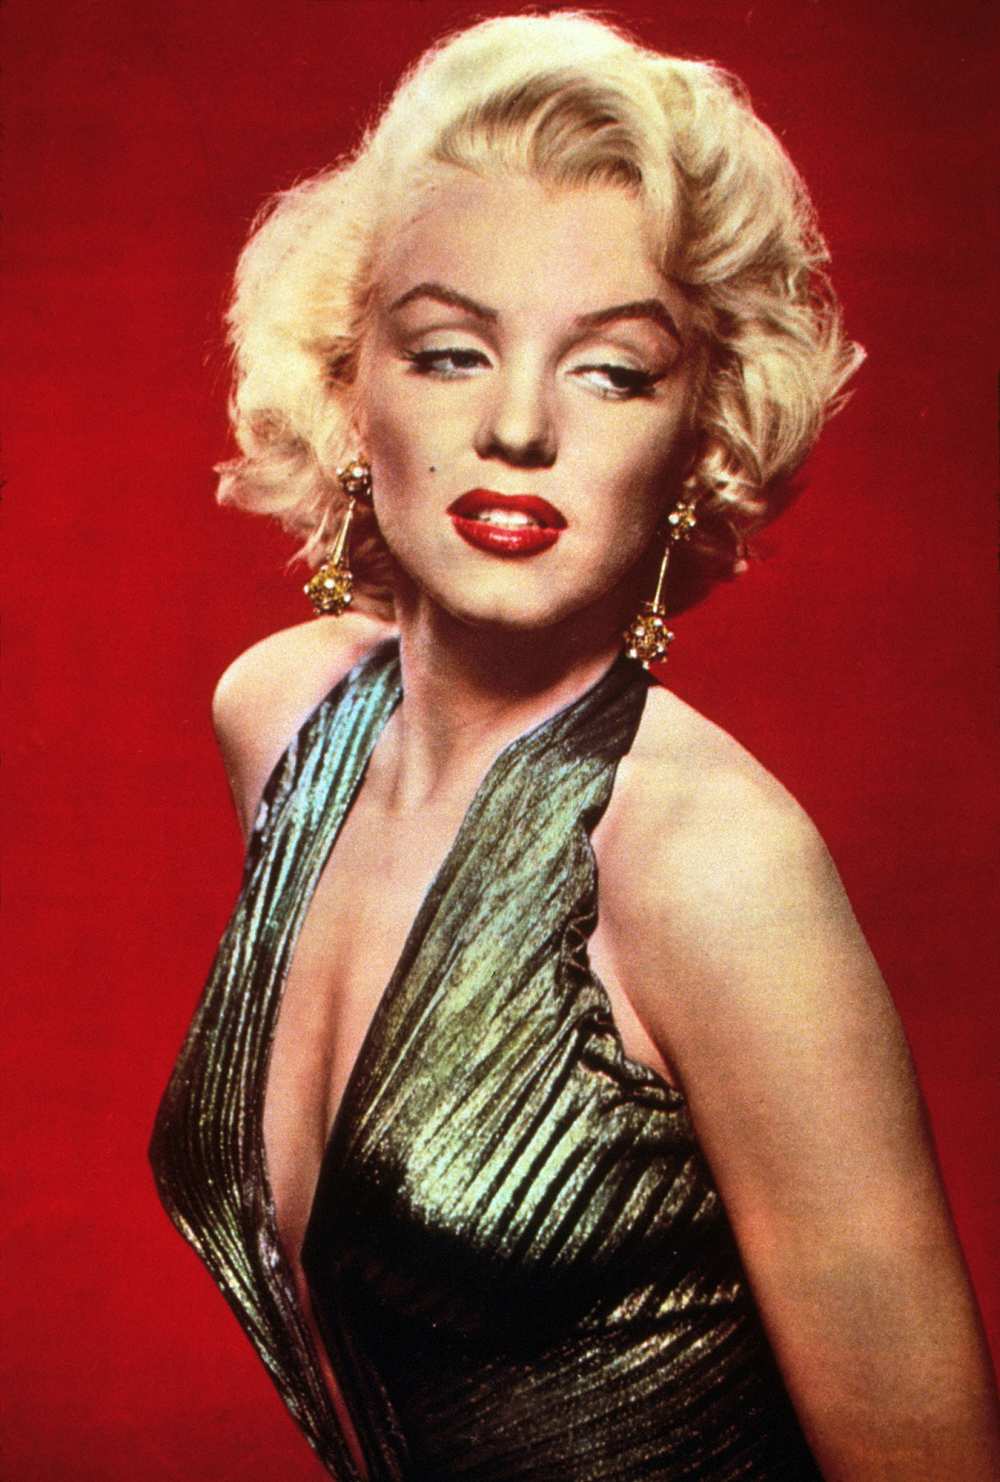 The FBI coverup of Marilyn Monroe's death and affairs with both